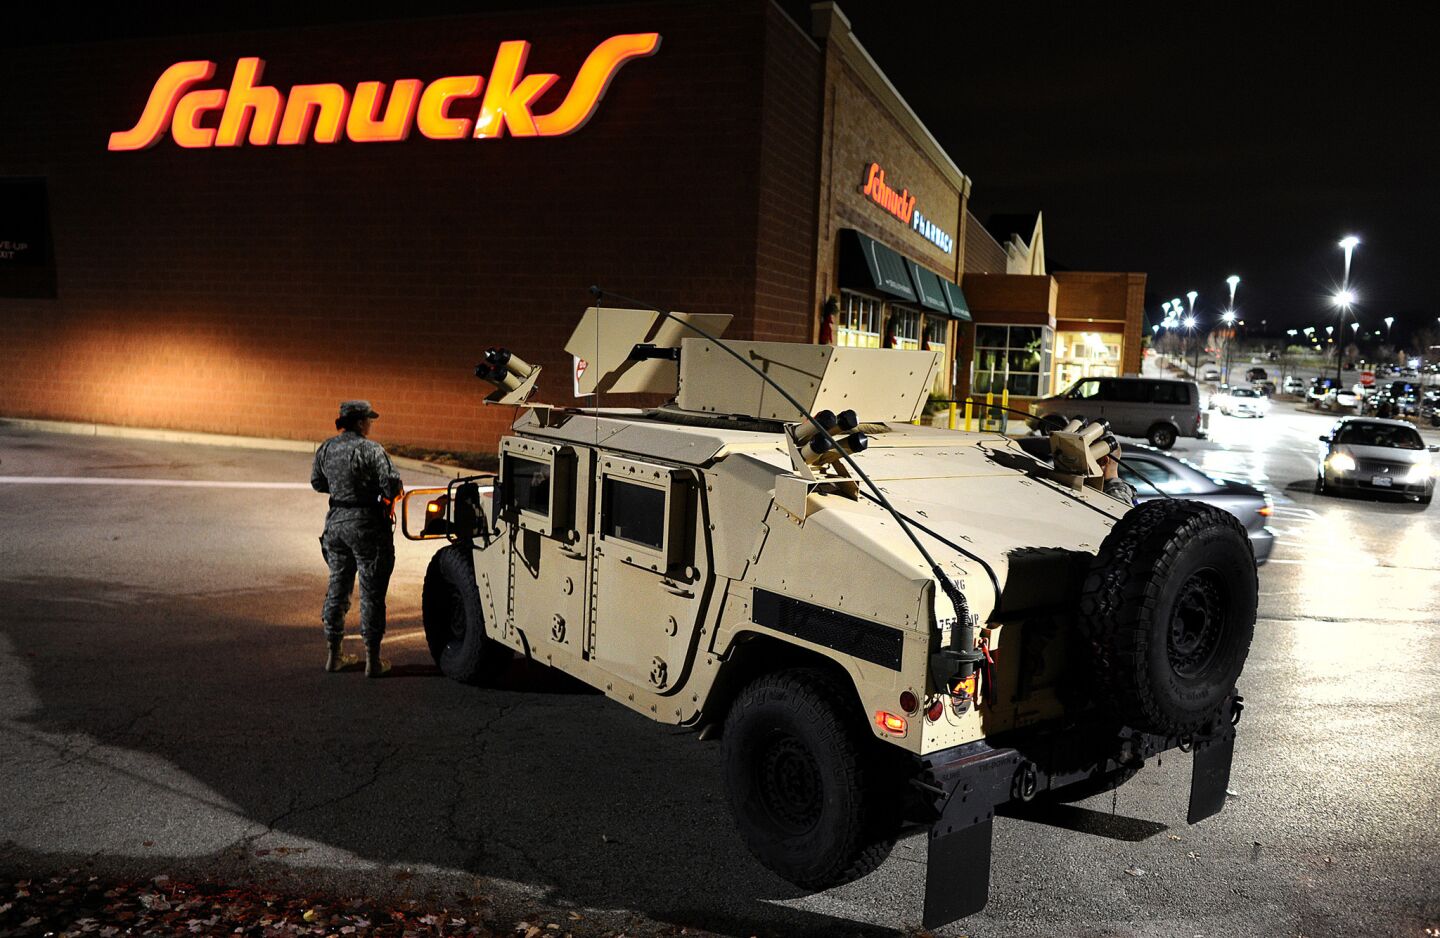 National Guardsmen take up positions in a shopping center in Ferguson, Mo., on Nov. 24 before the announcement that a grand jury had declined to charge police Officer Darren Wilson in the killing of Michael Brown.